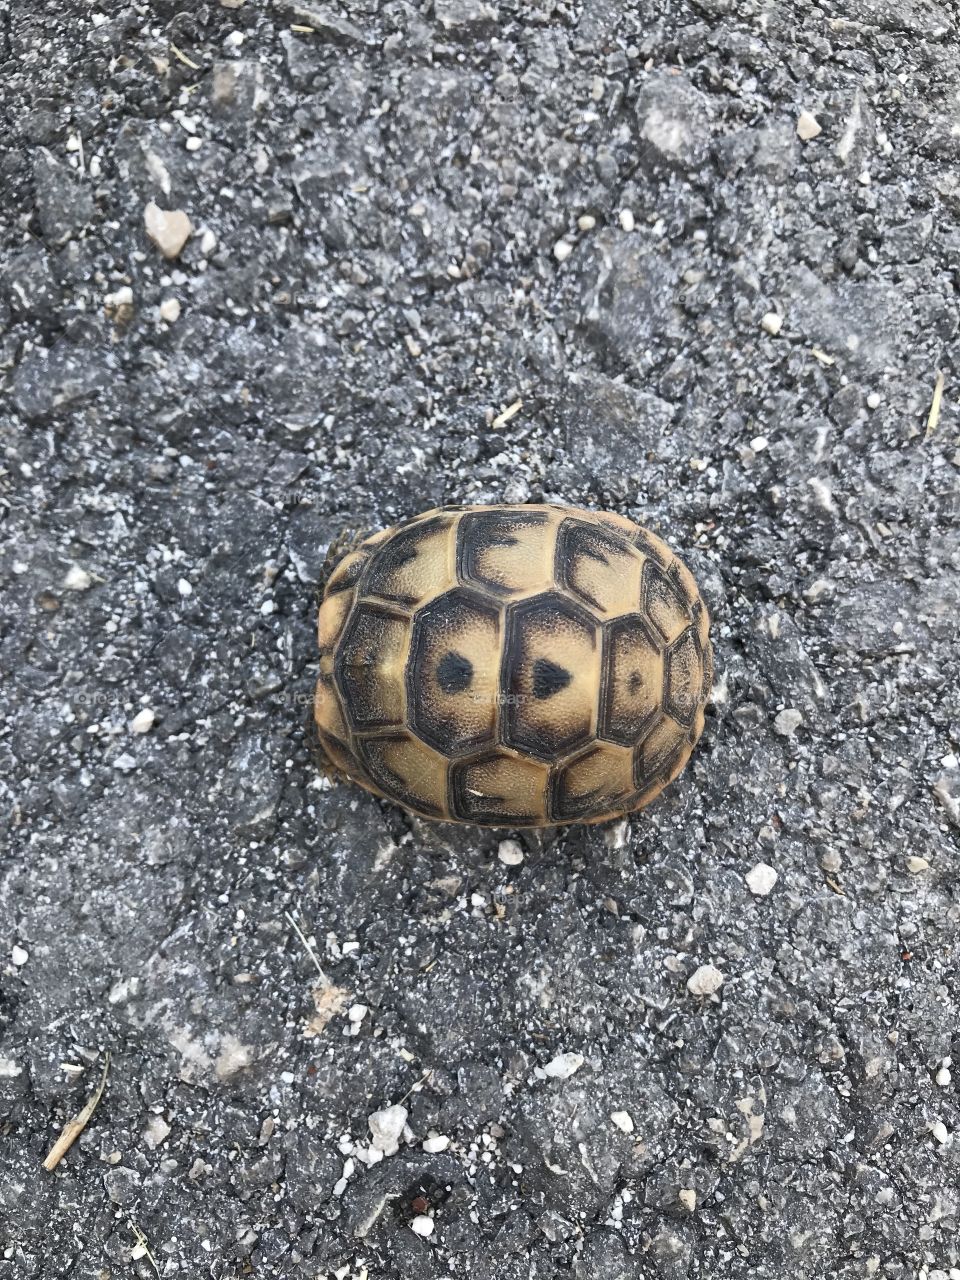 An adorable tortoise on the road 